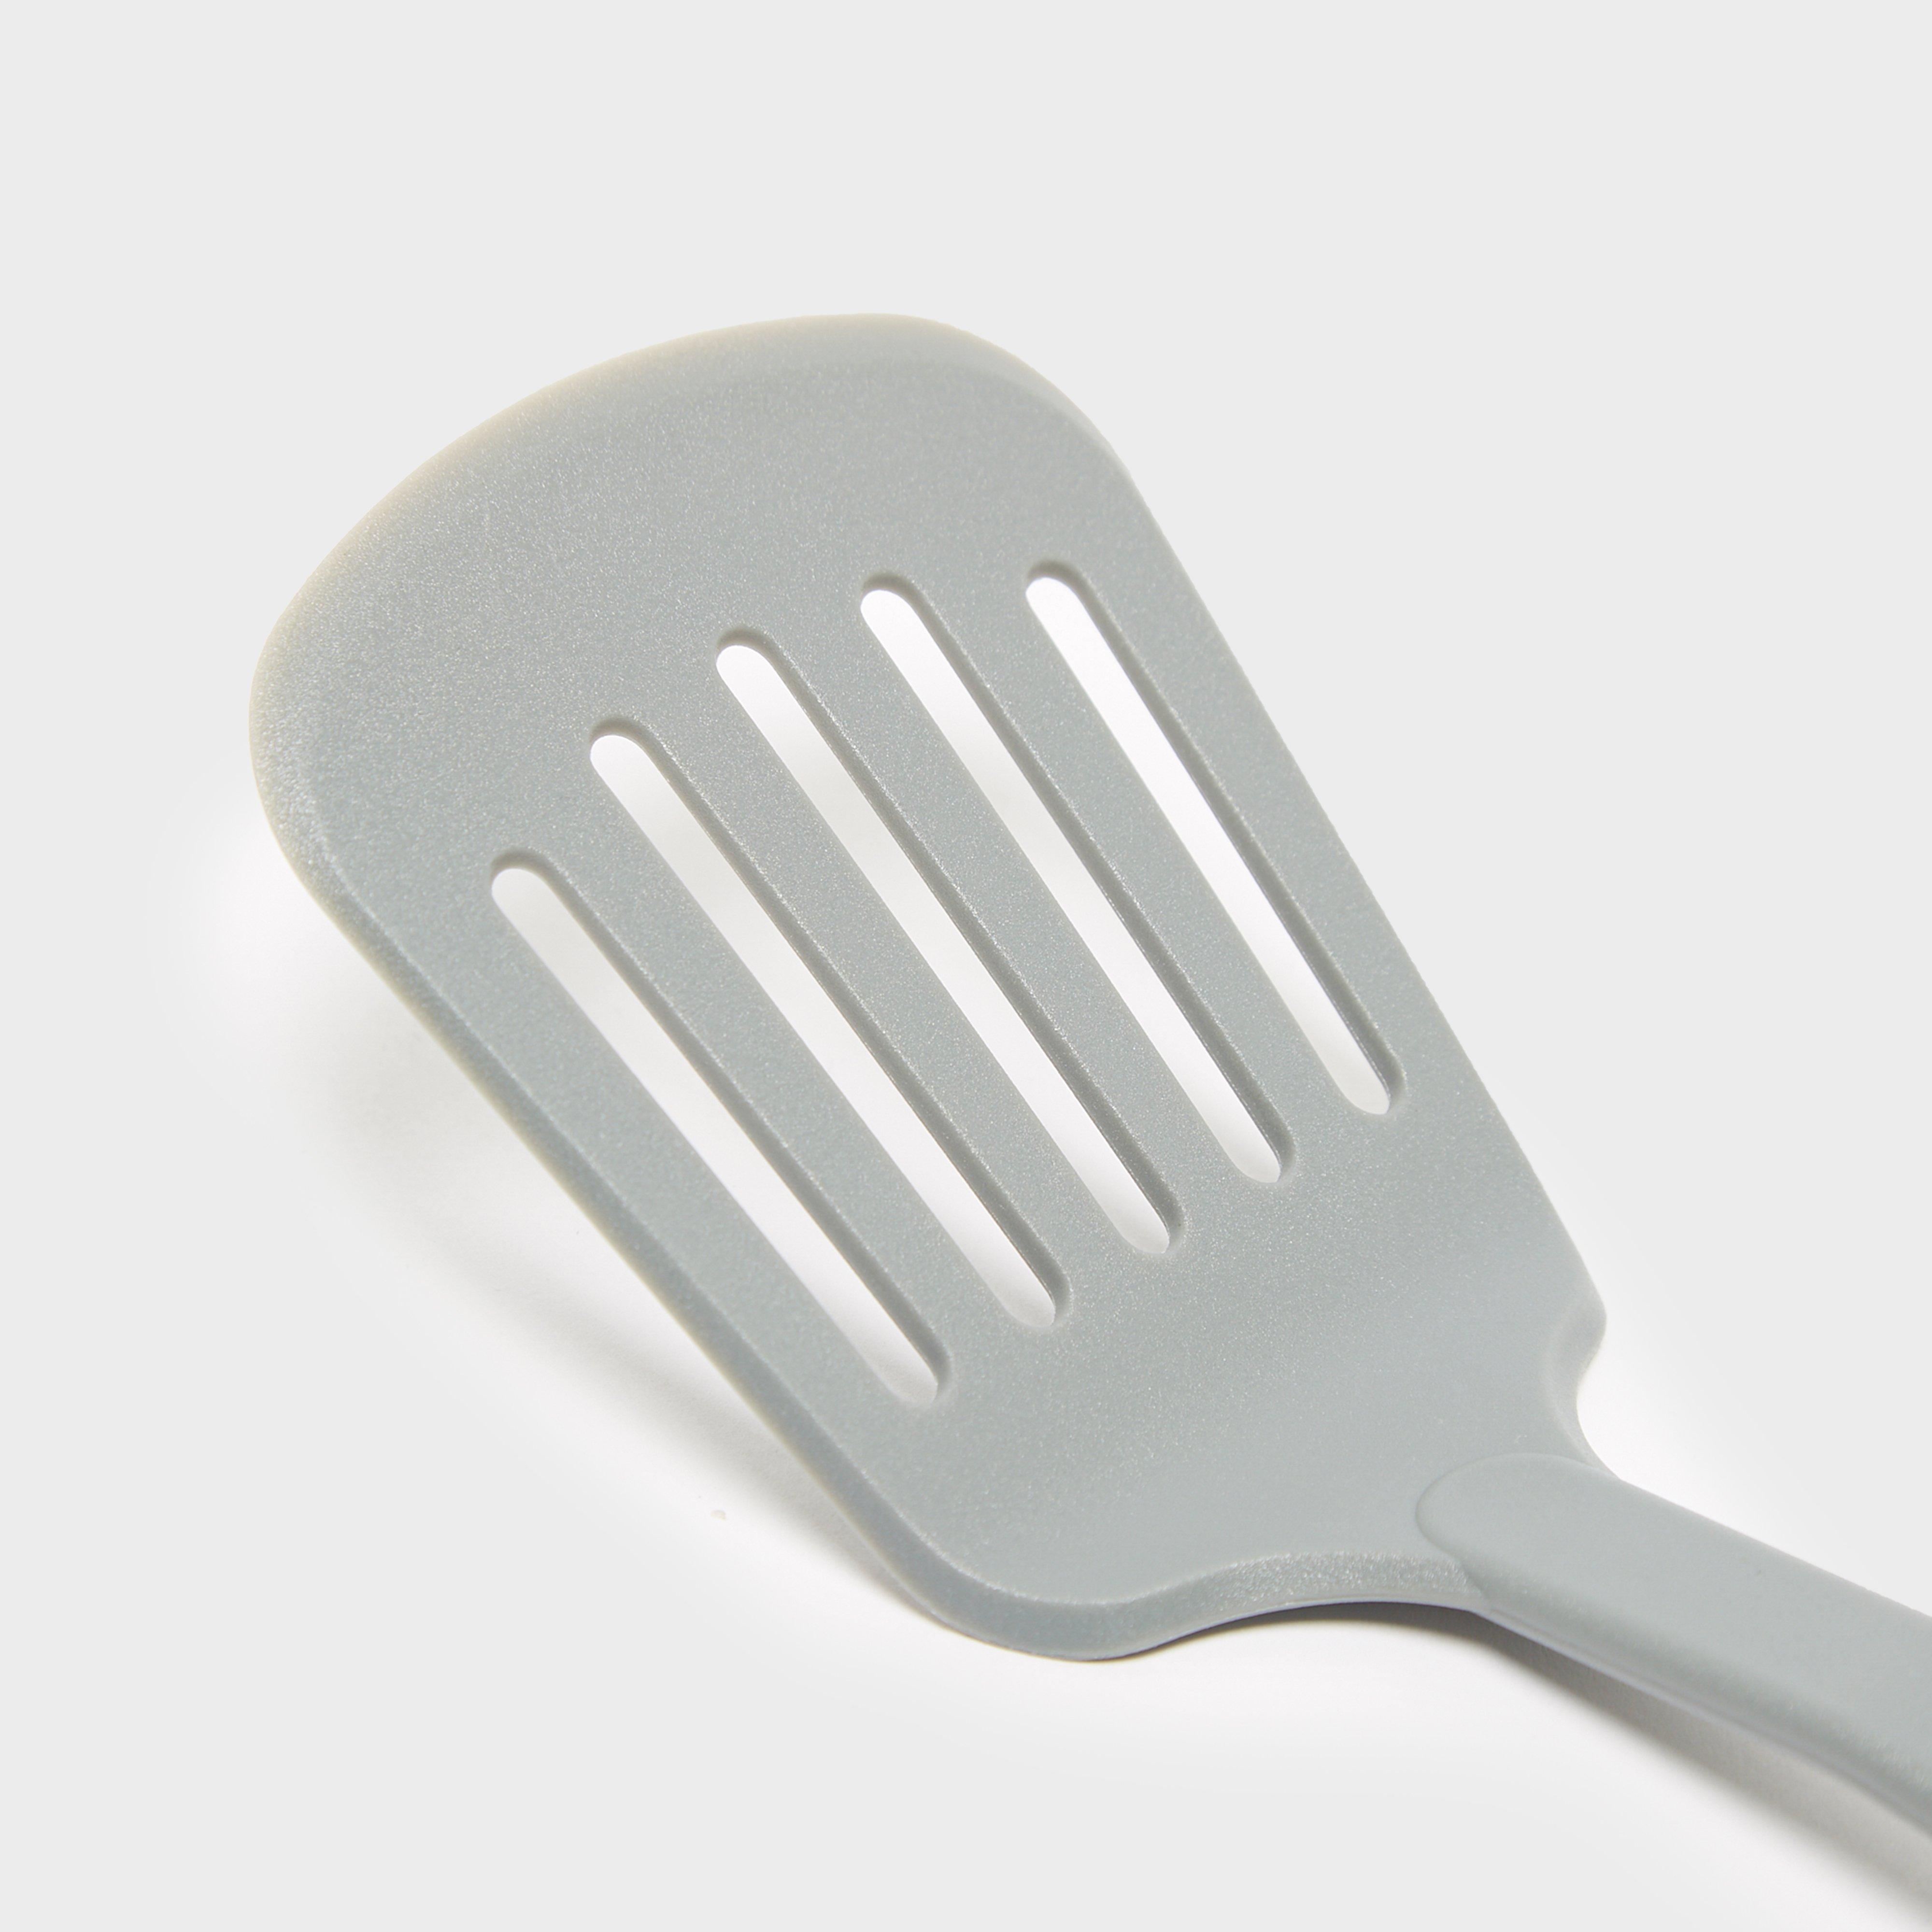 Hi-Gear Slotted Spatula with Handle Review